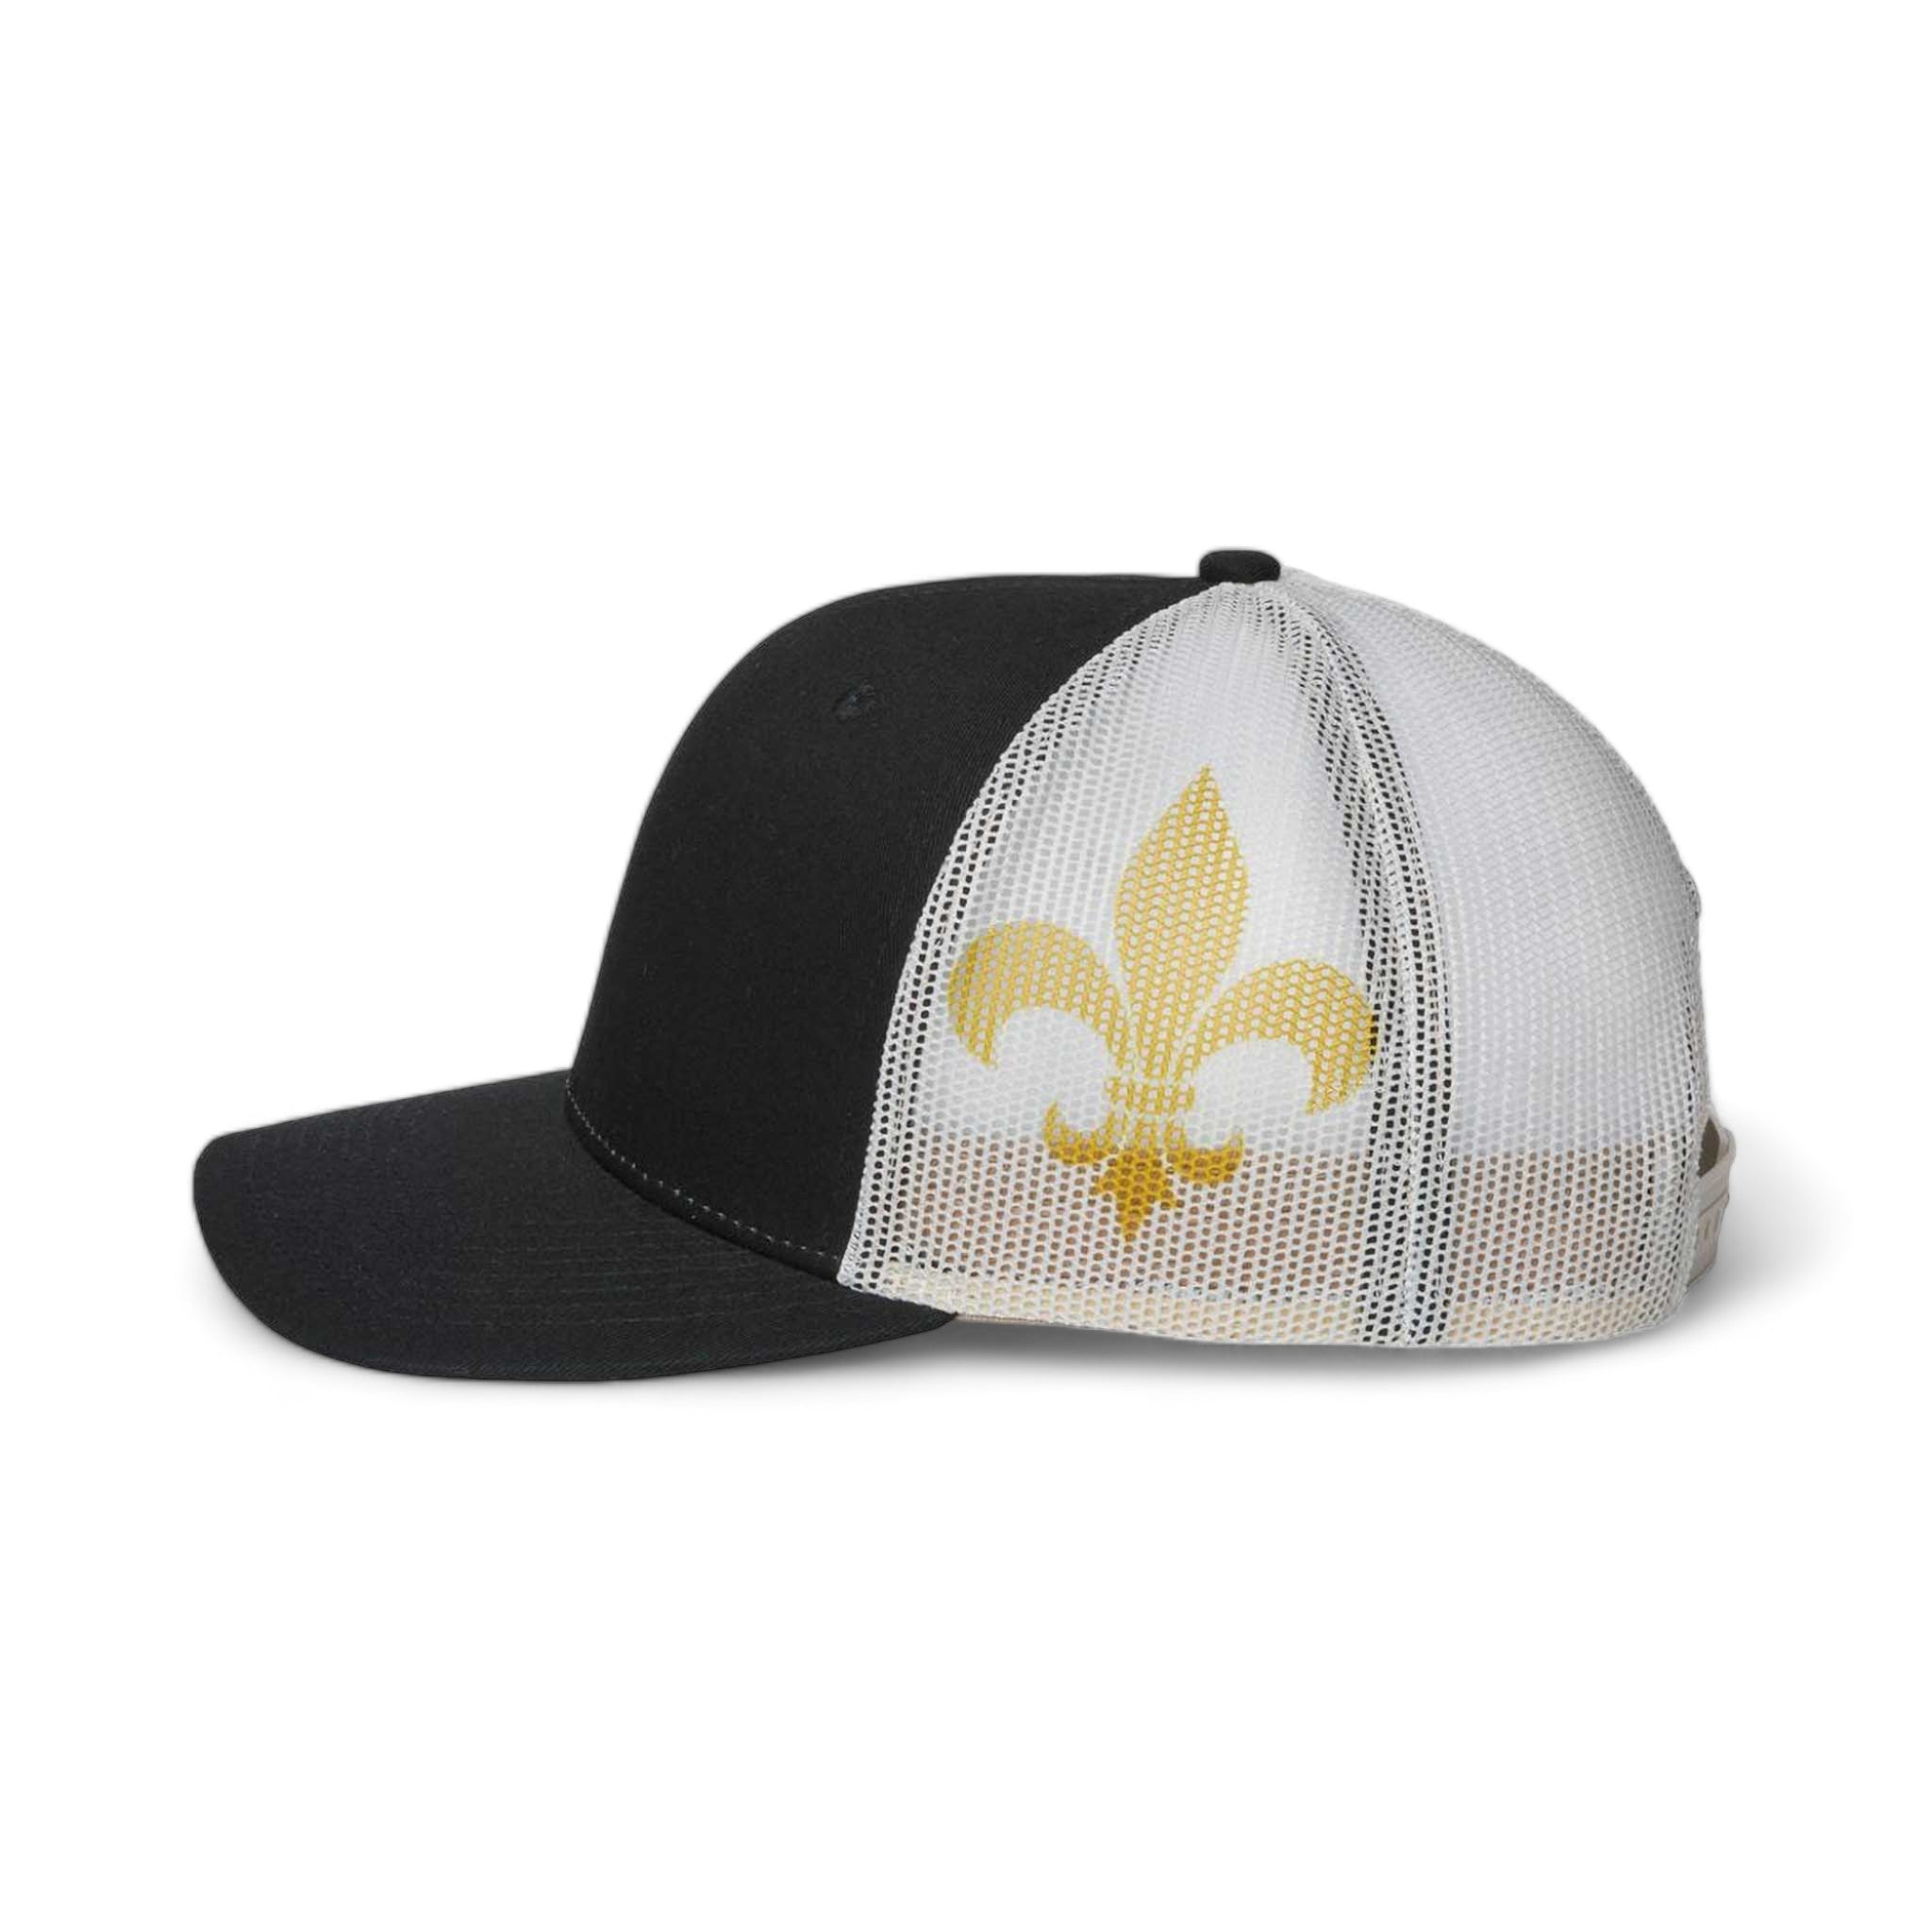 Side view of Kati S700M custom hat in black and vegas gold